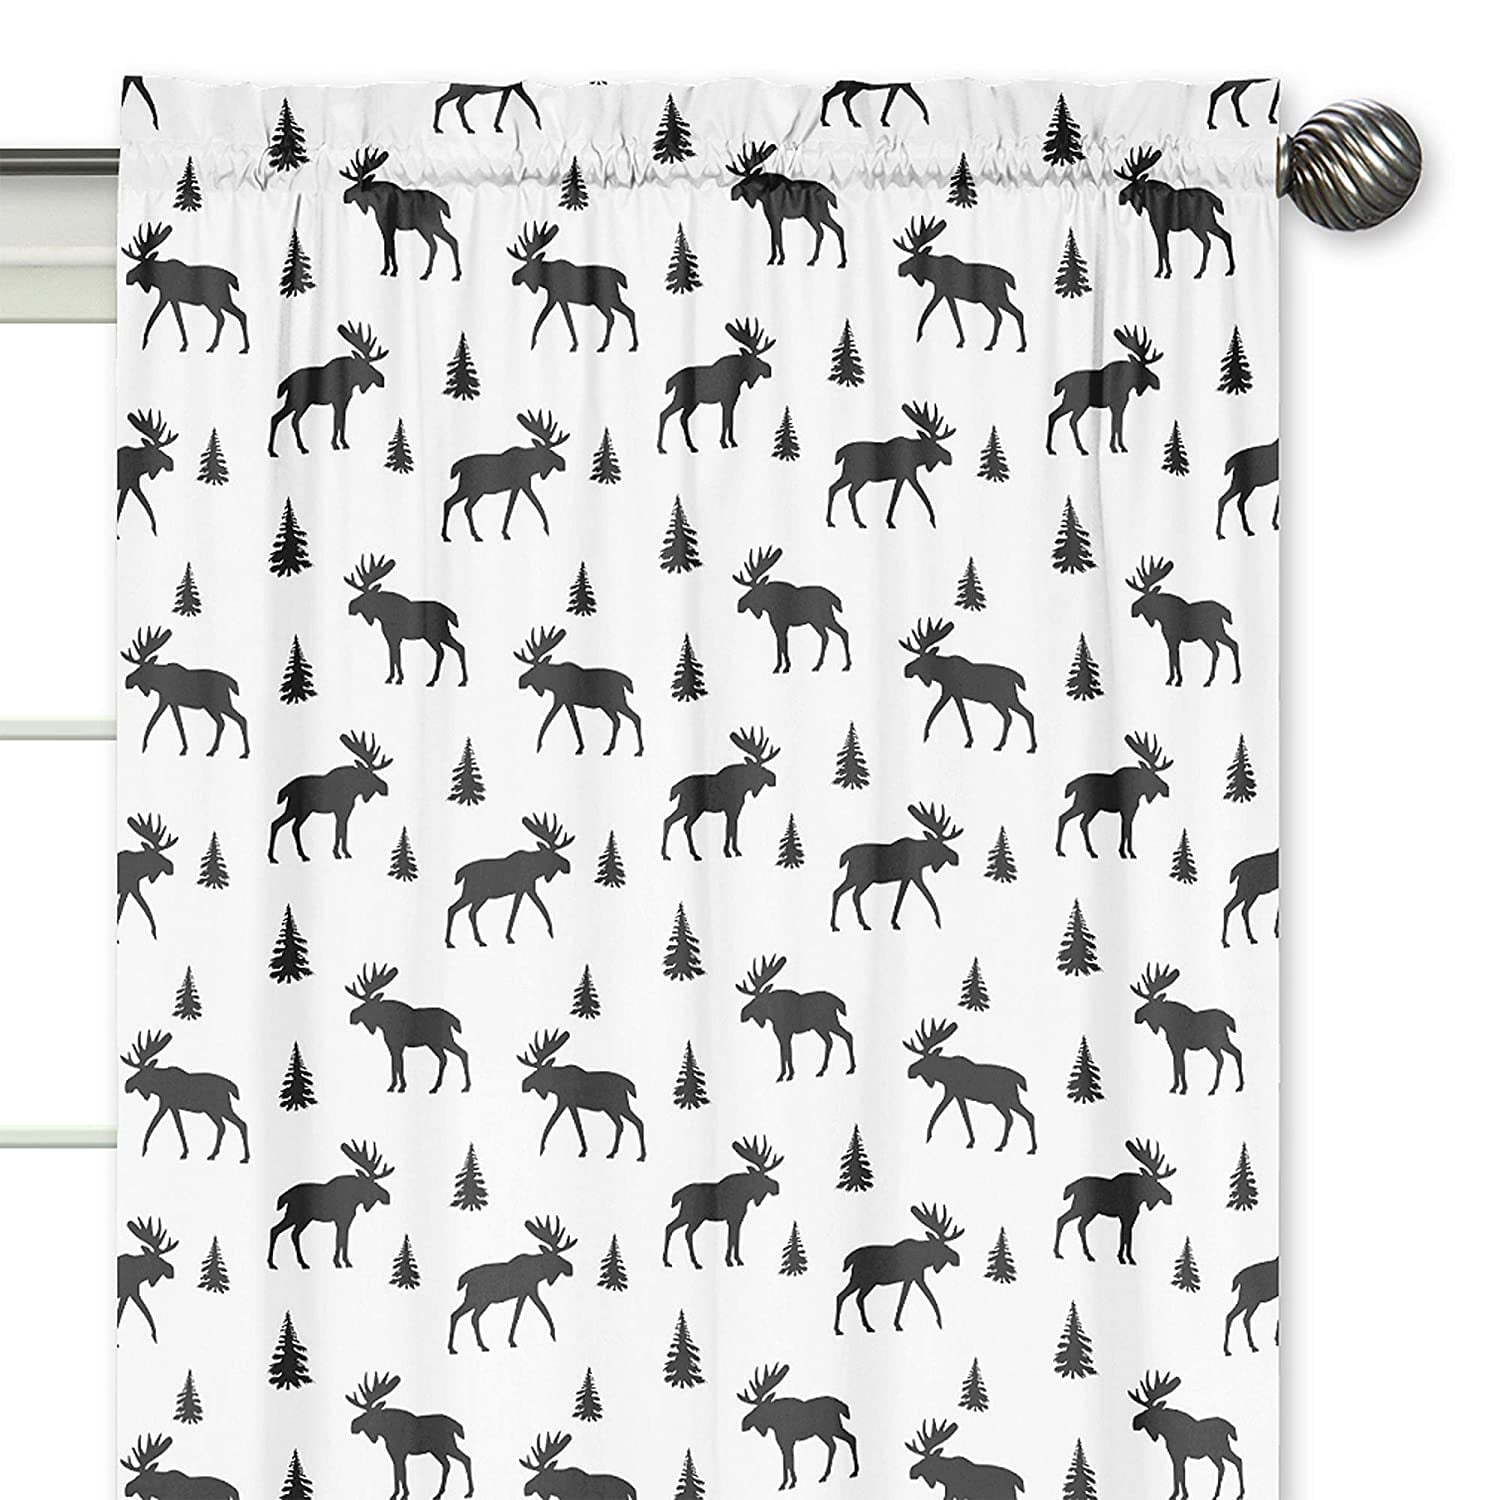 Sweet Jojo Designs Black and White Woodland Moose Window Treatment Panels Curtains for Rustic Patch Collection Set of 2 